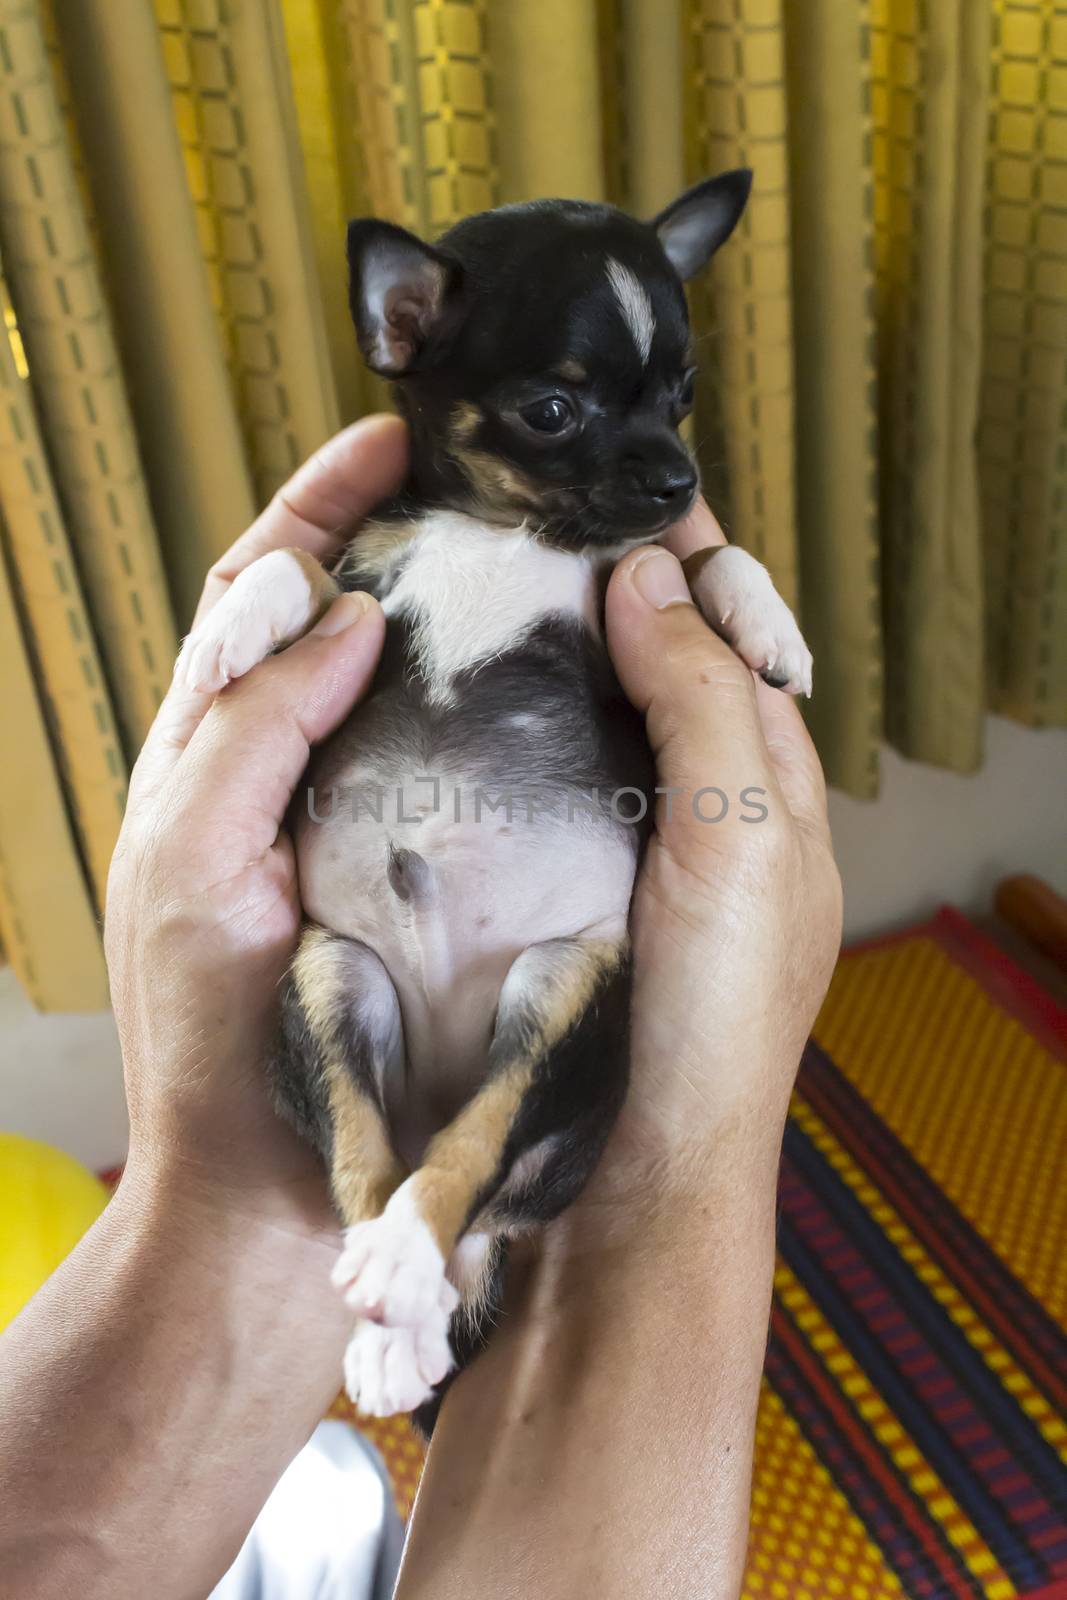 Puppy chihuahua in hand